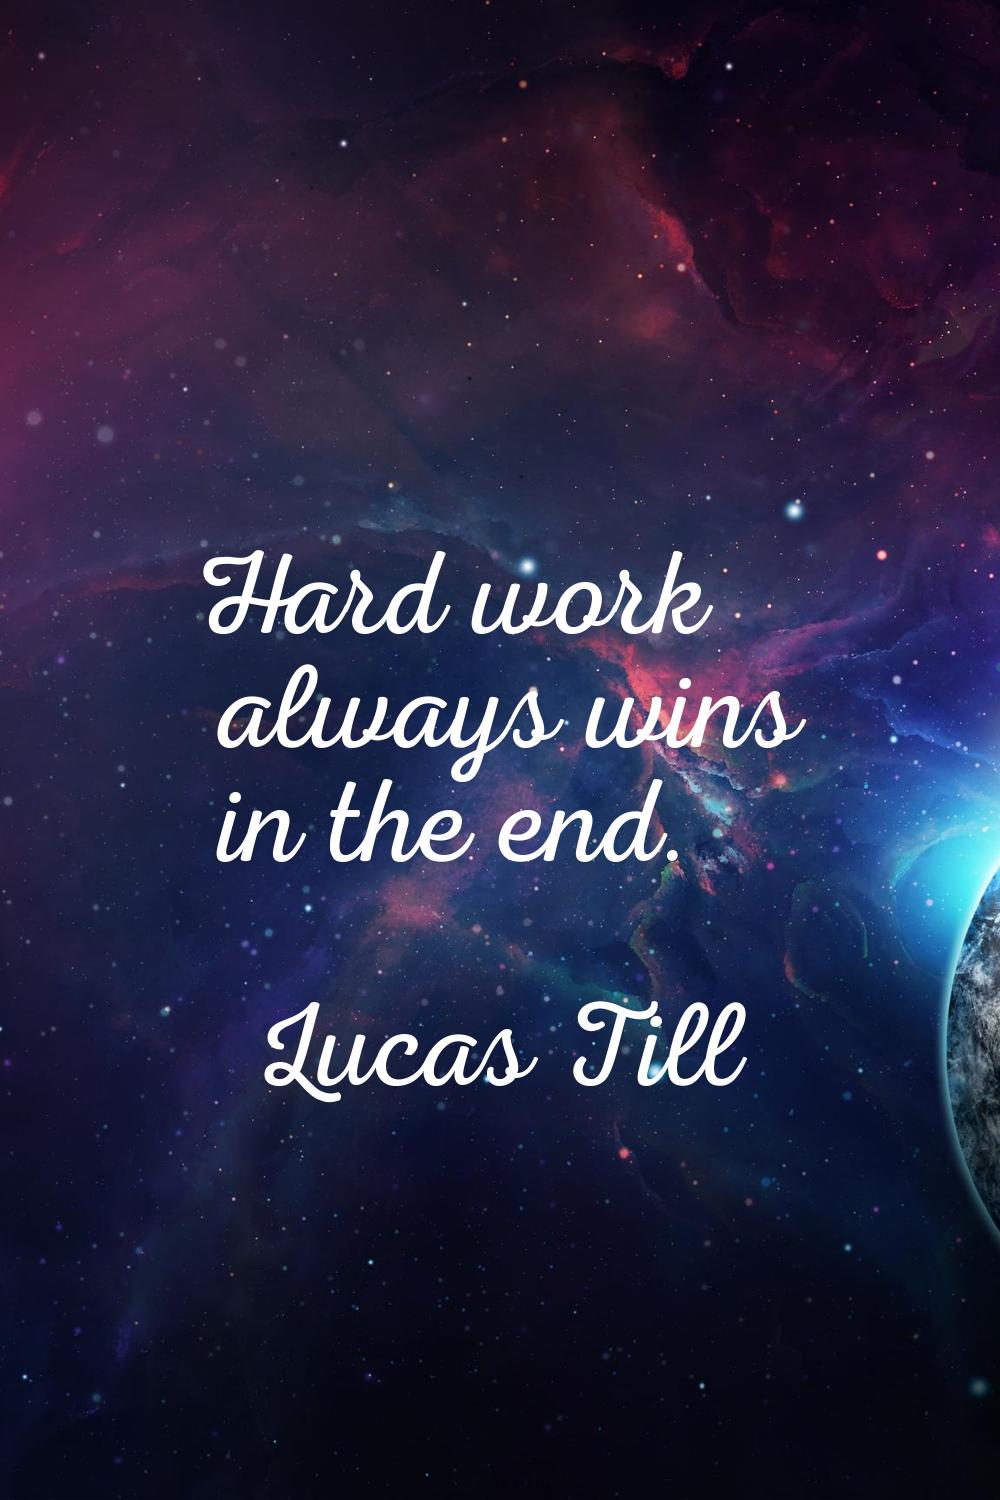 Hard work always wins in the end.